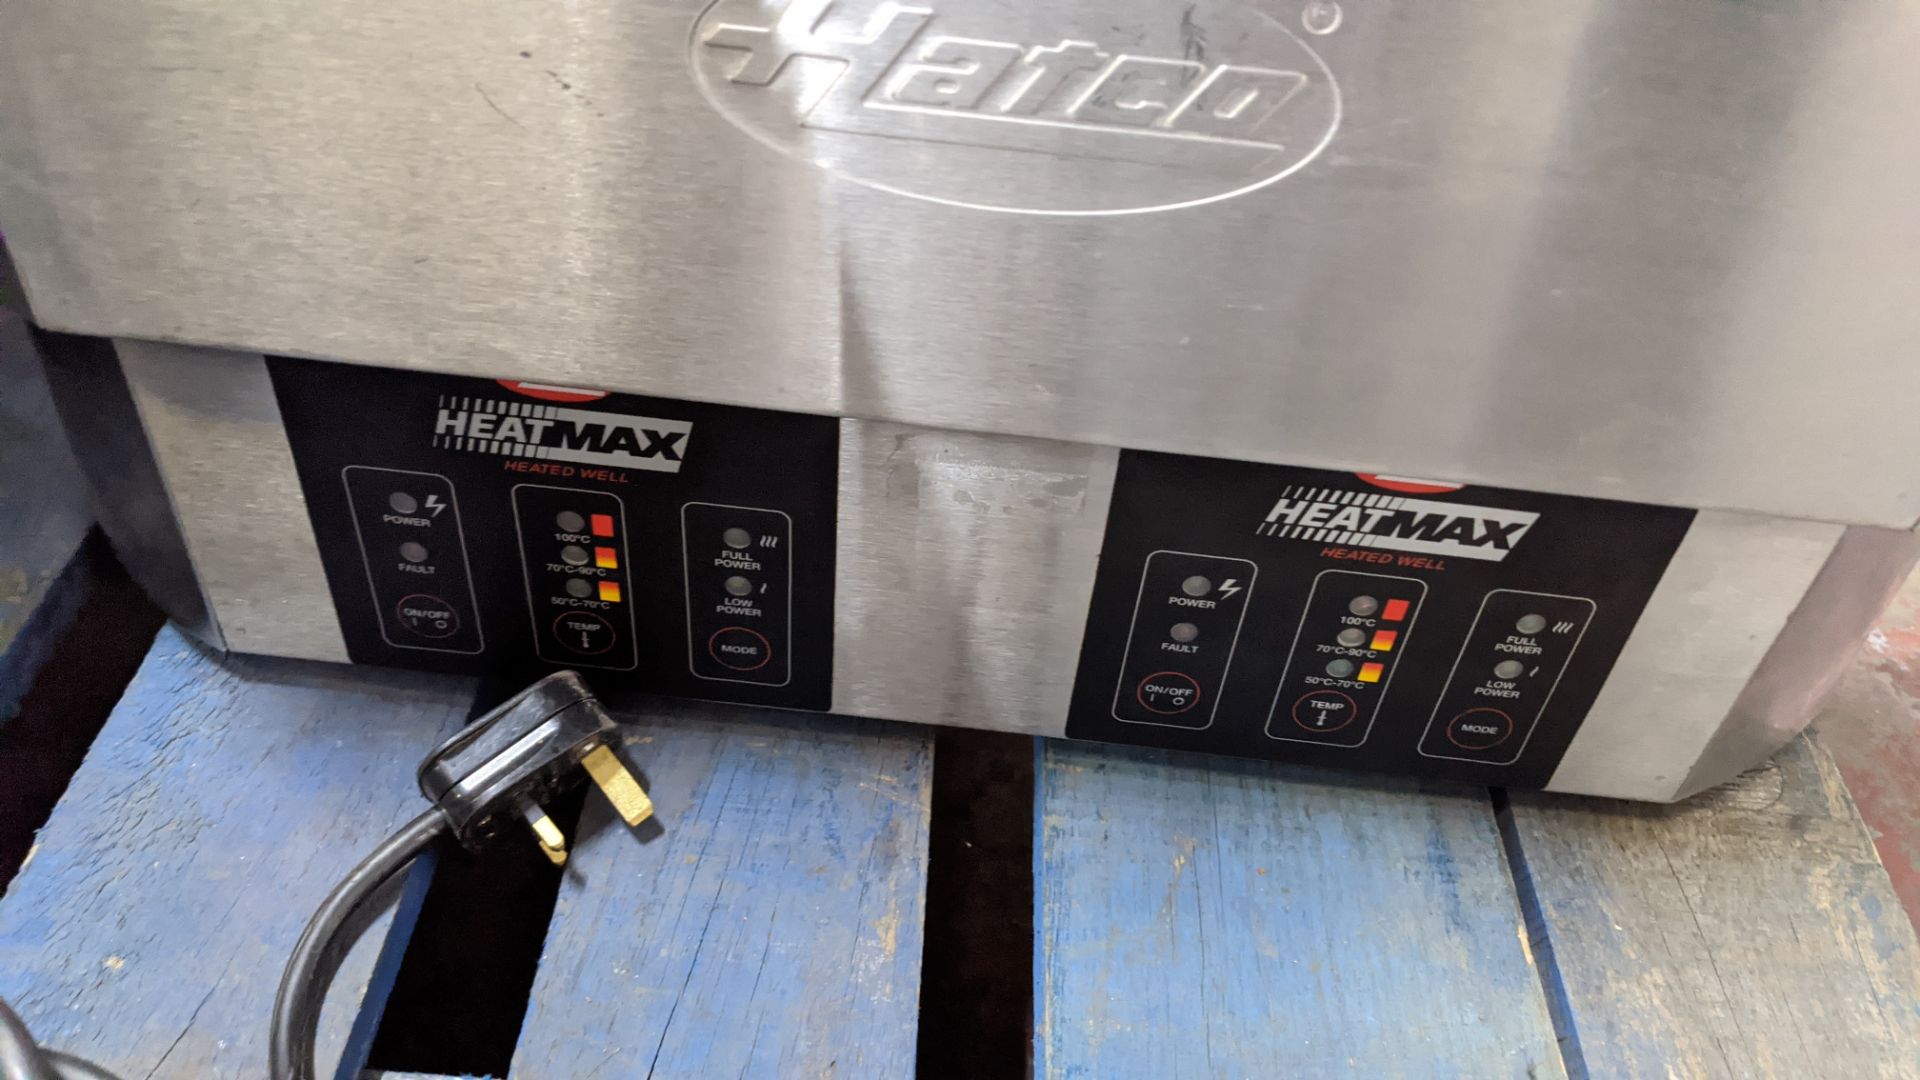 Hatco Heatmax twin well soup urn system - Image 3 of 6